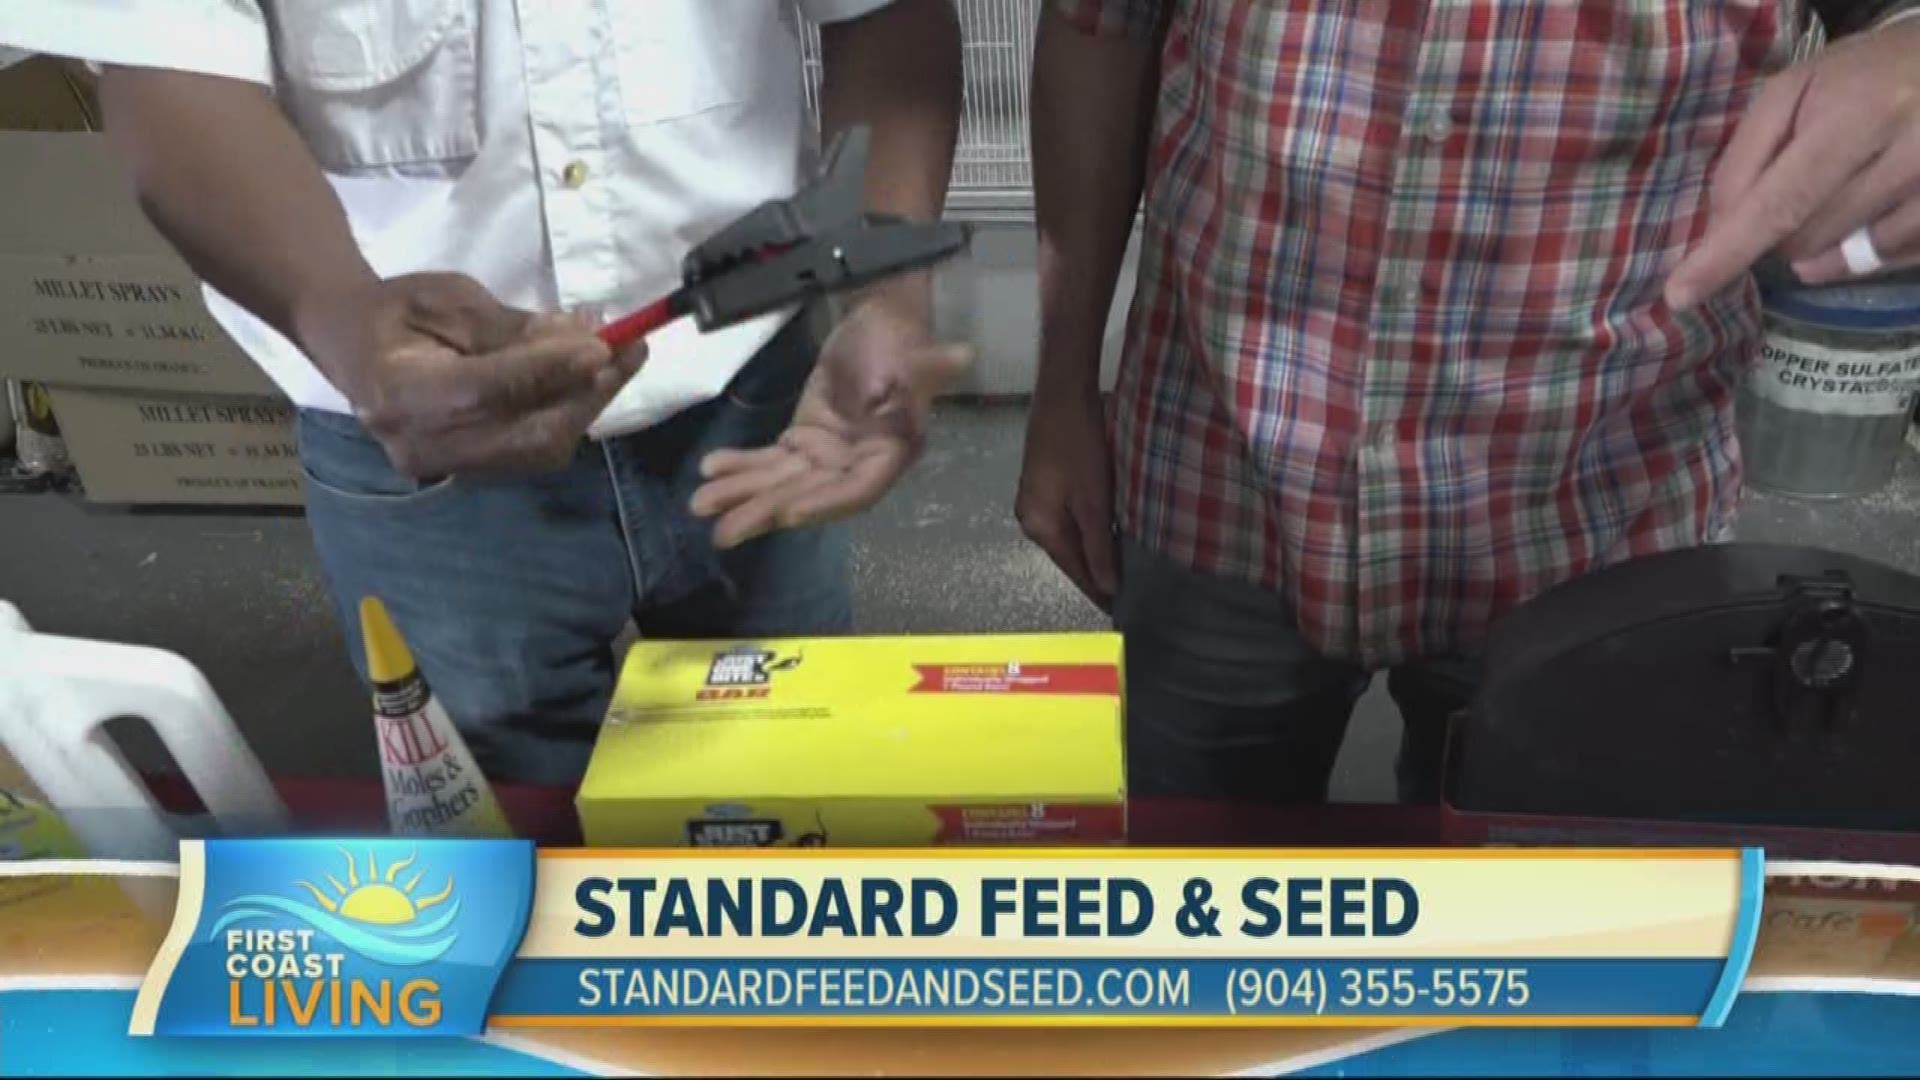 Standard Feed & Seed offers tips and supplies to take care of pests that may bother your lawn, garden or home.